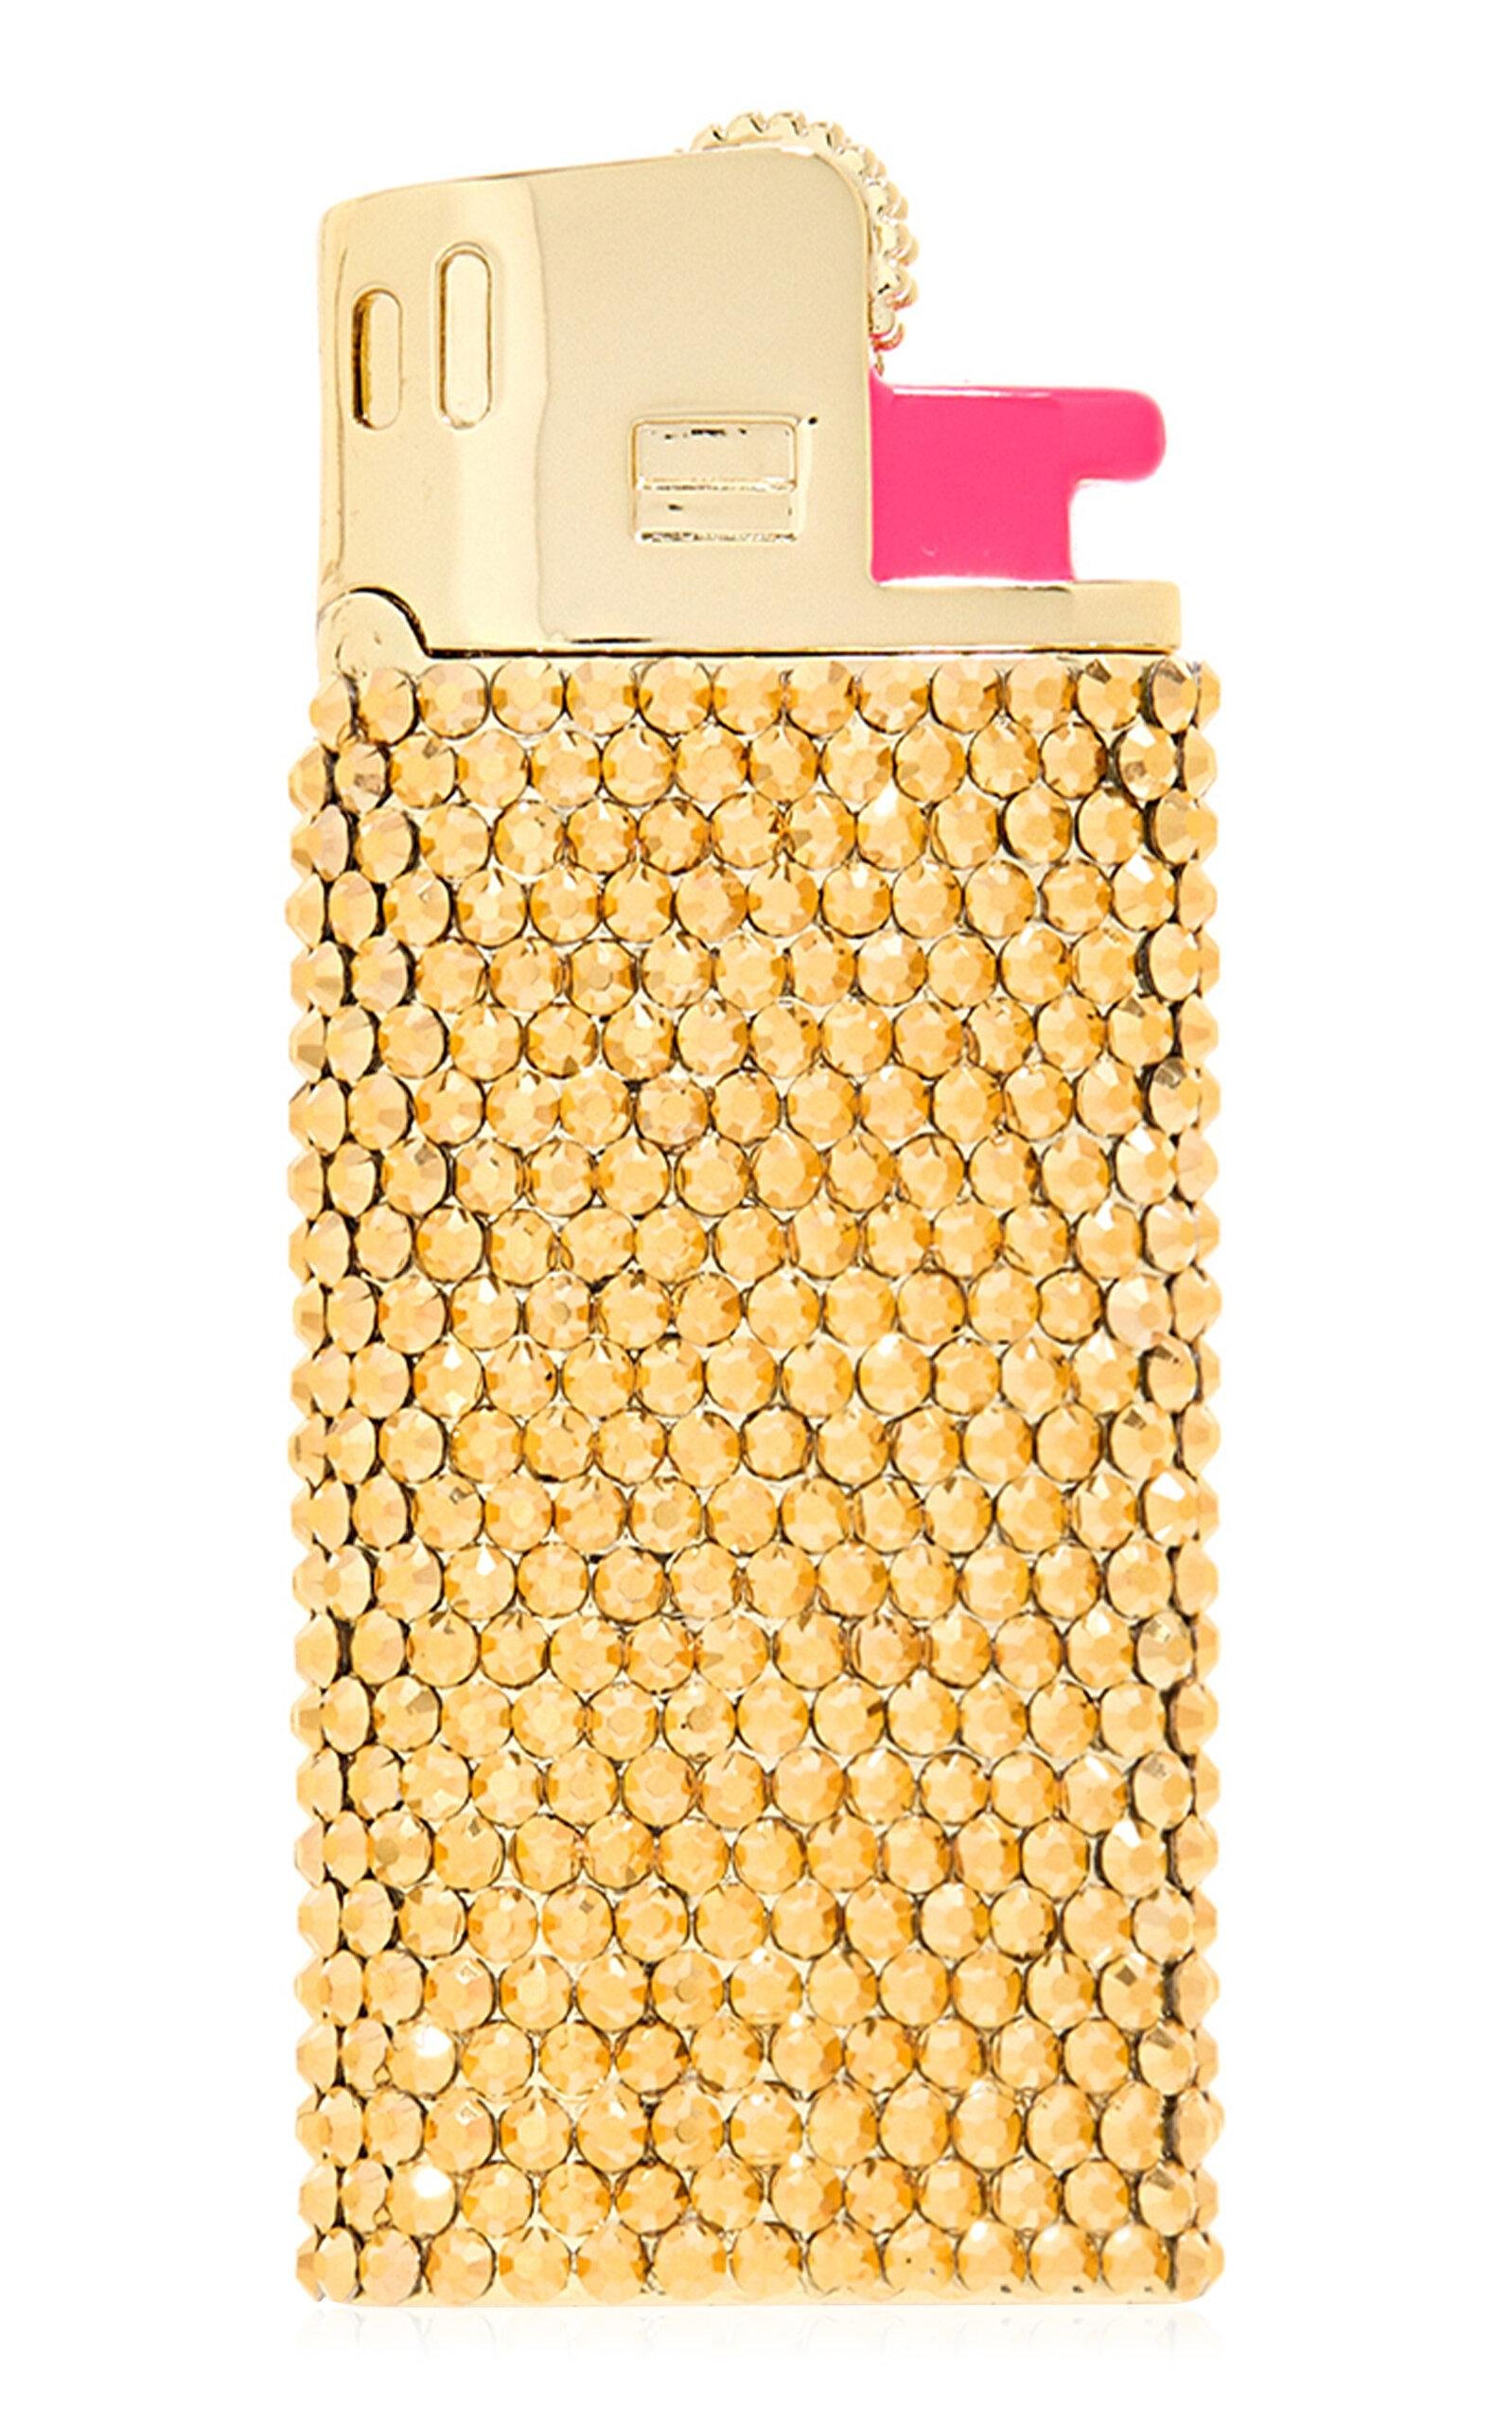 Judith Leiber Couture - Got A Light? Flame Miniature Crystal Pillbox - Gold - OS - Only At Moda Operandi by JUDITH LEIBER COUTURE